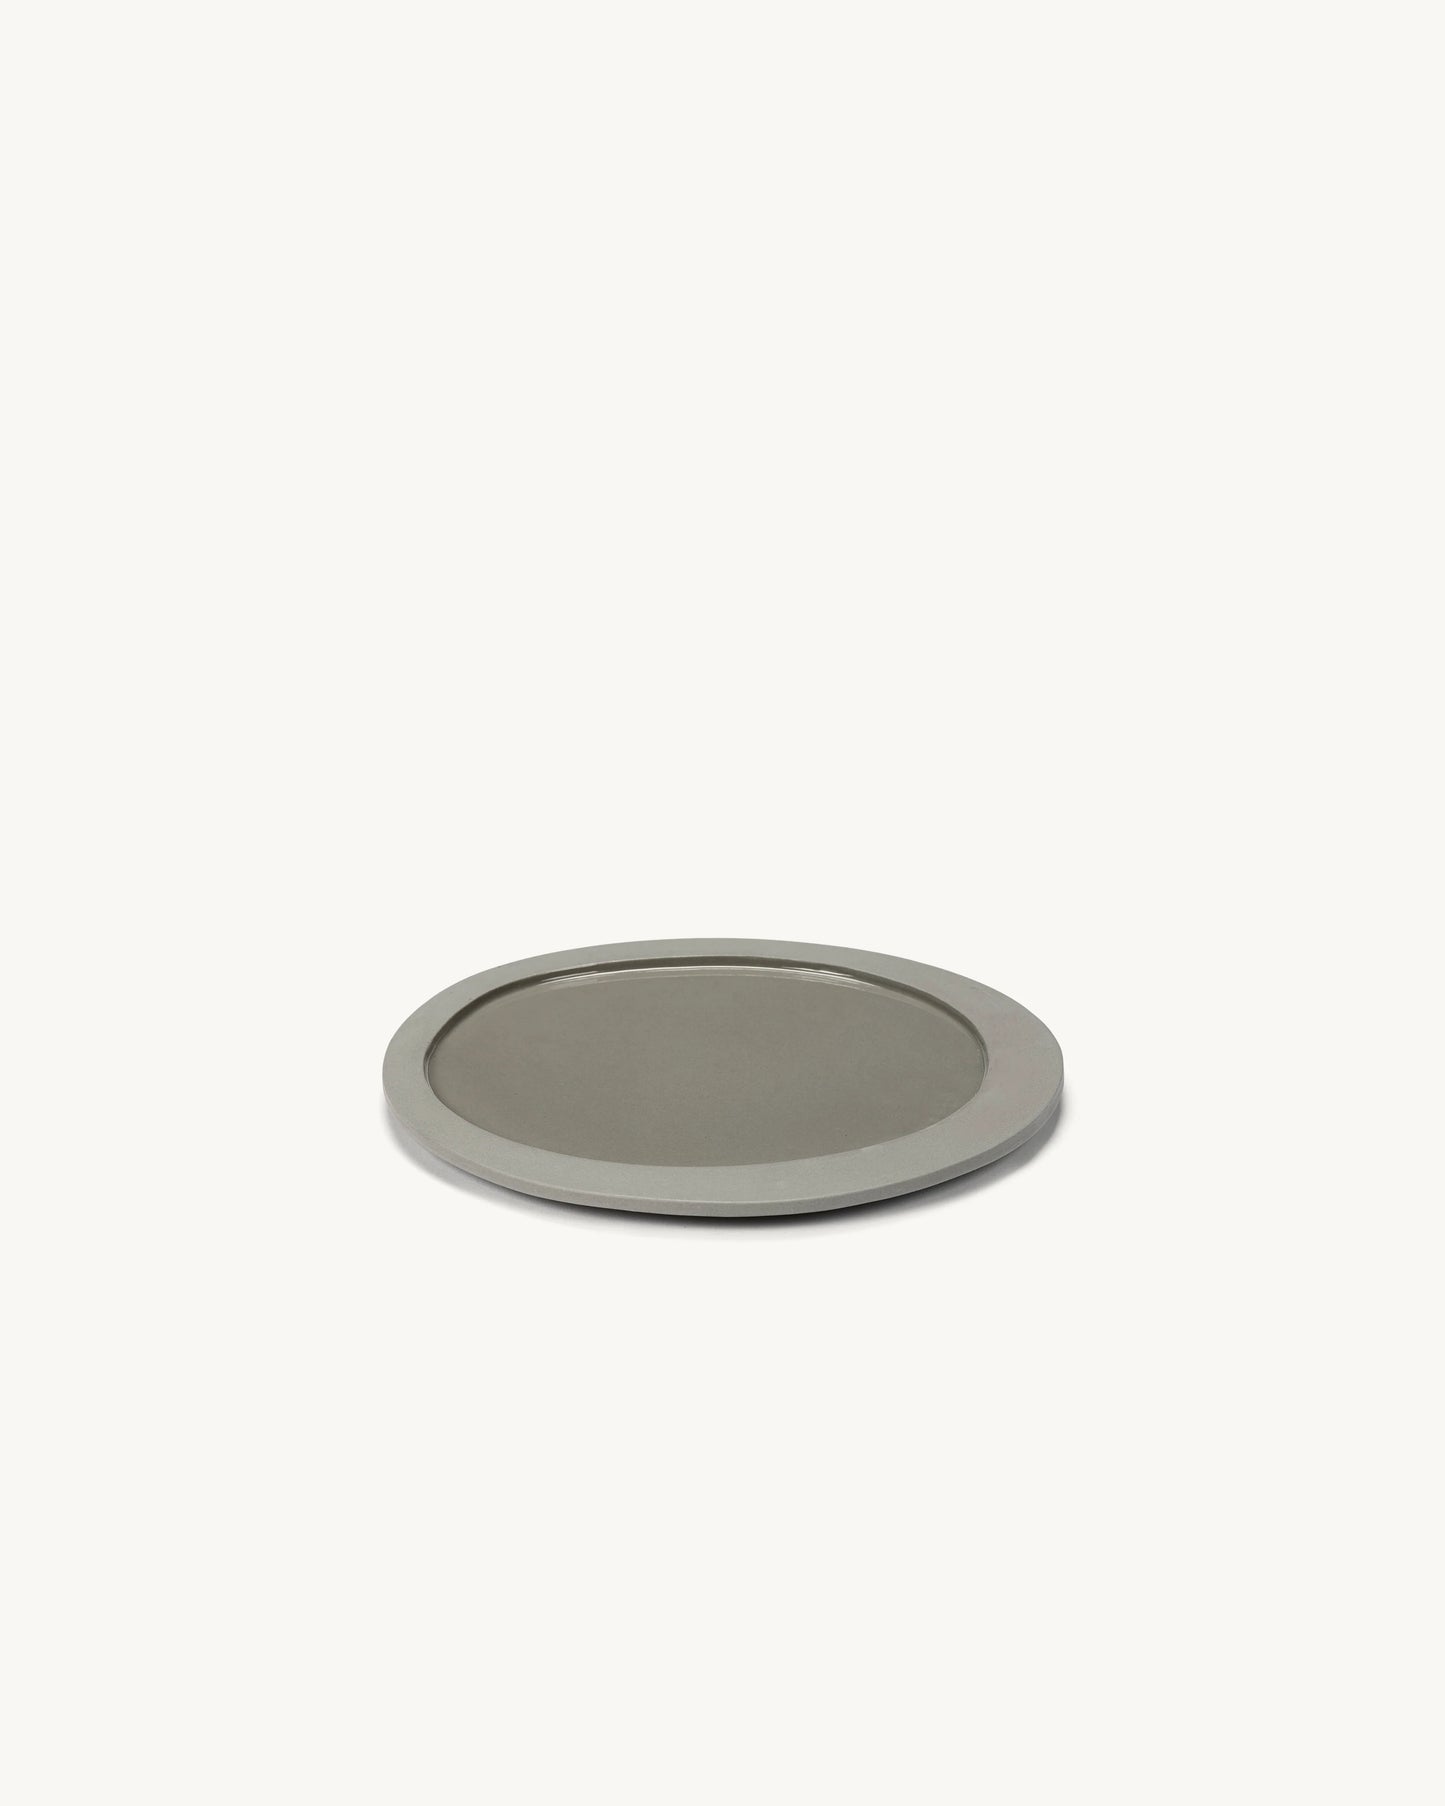 Valerie Objects Inner circle Small Plate, light grey by Maarten Baas - $43.00